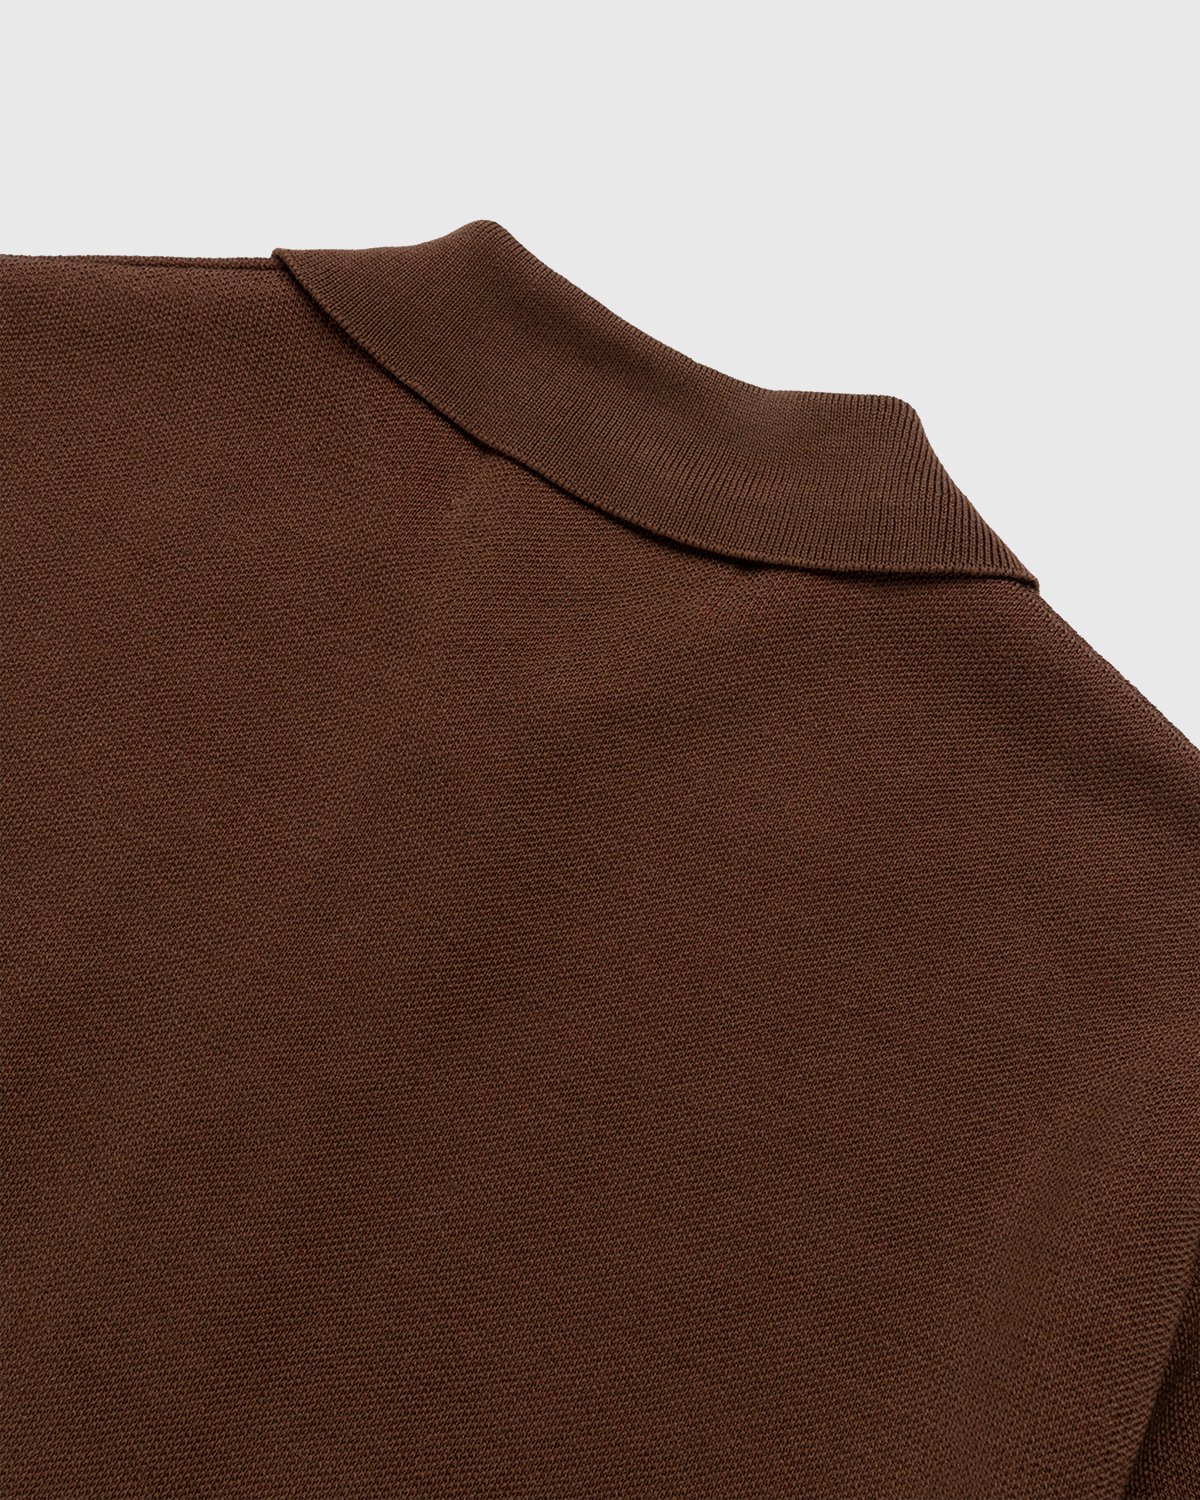 Carne Bollente - Upside Down Knit Shirt Brown - Clothing - Brown - Image 3